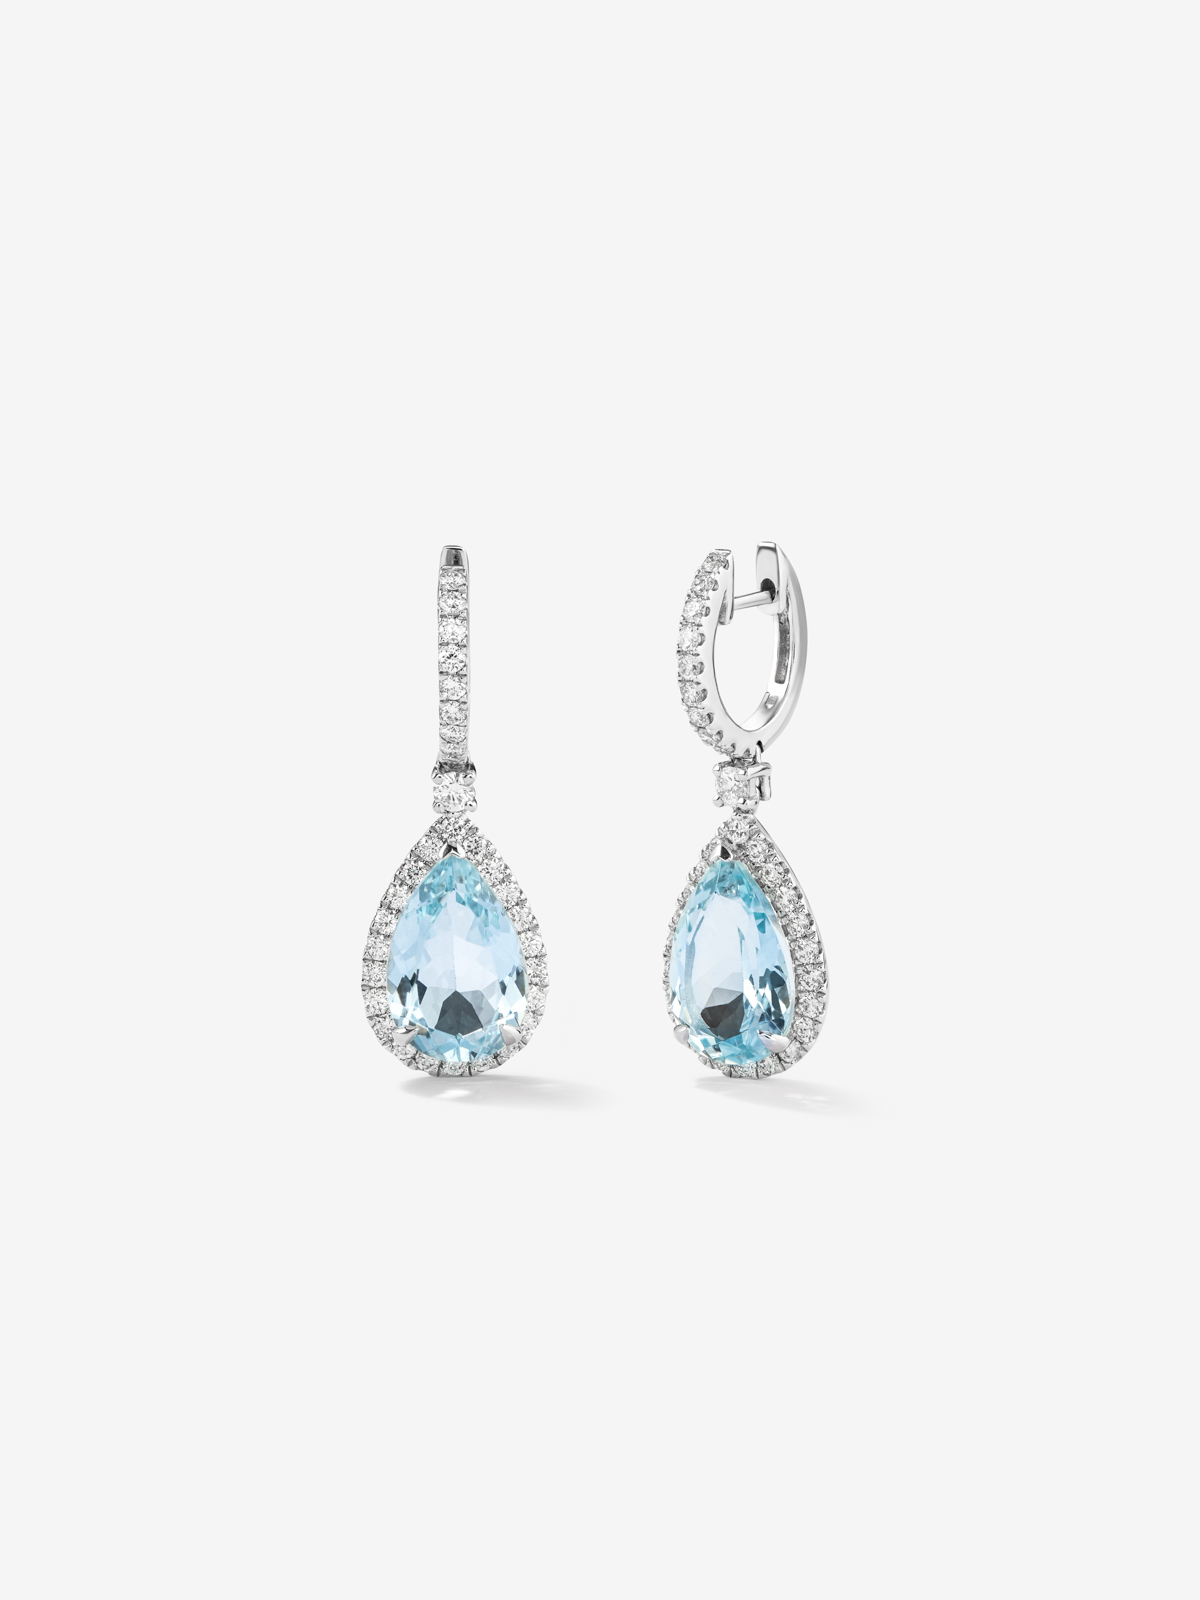 18K white gold earrings with blue aquamarines in 2.19 cts and white diamonds in bright 0.68 cts